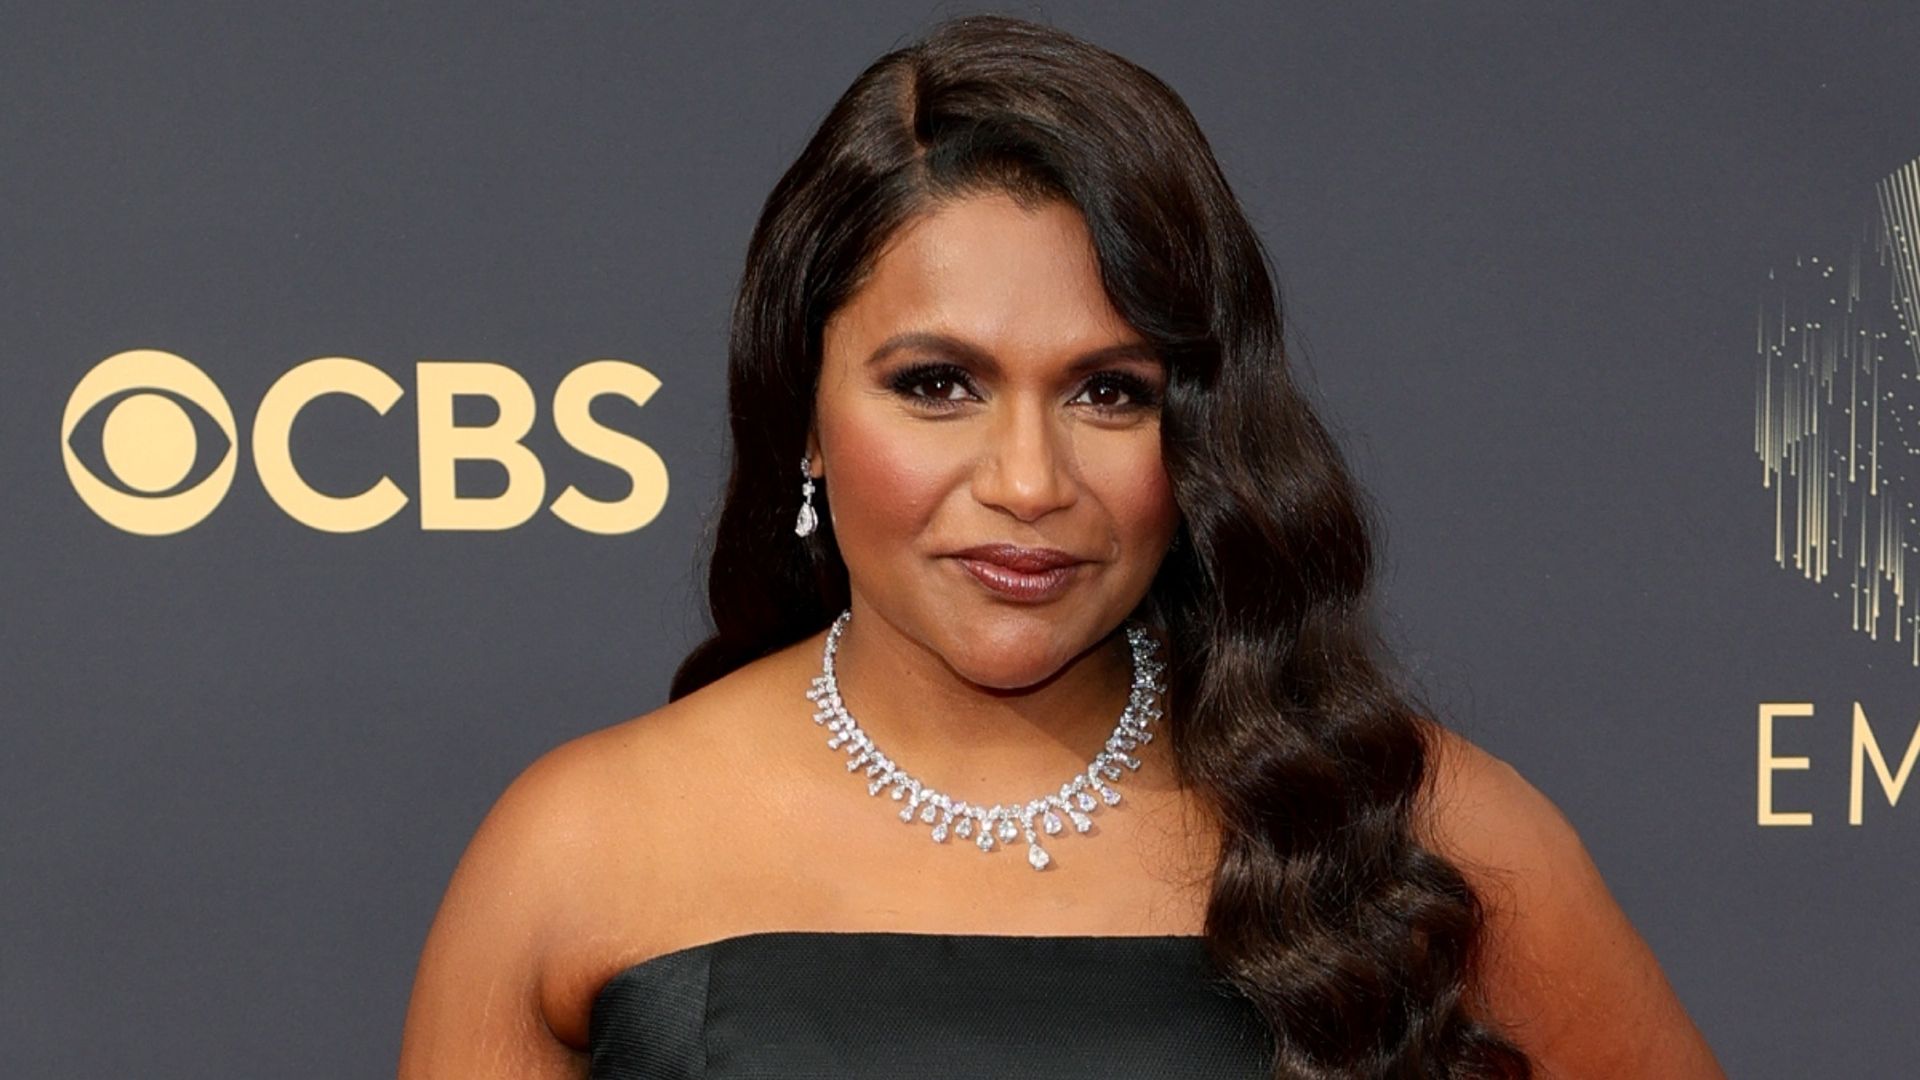 Mindy Kaling's Oscars Look 2020 Is Pure Sunshine – StyleCaster